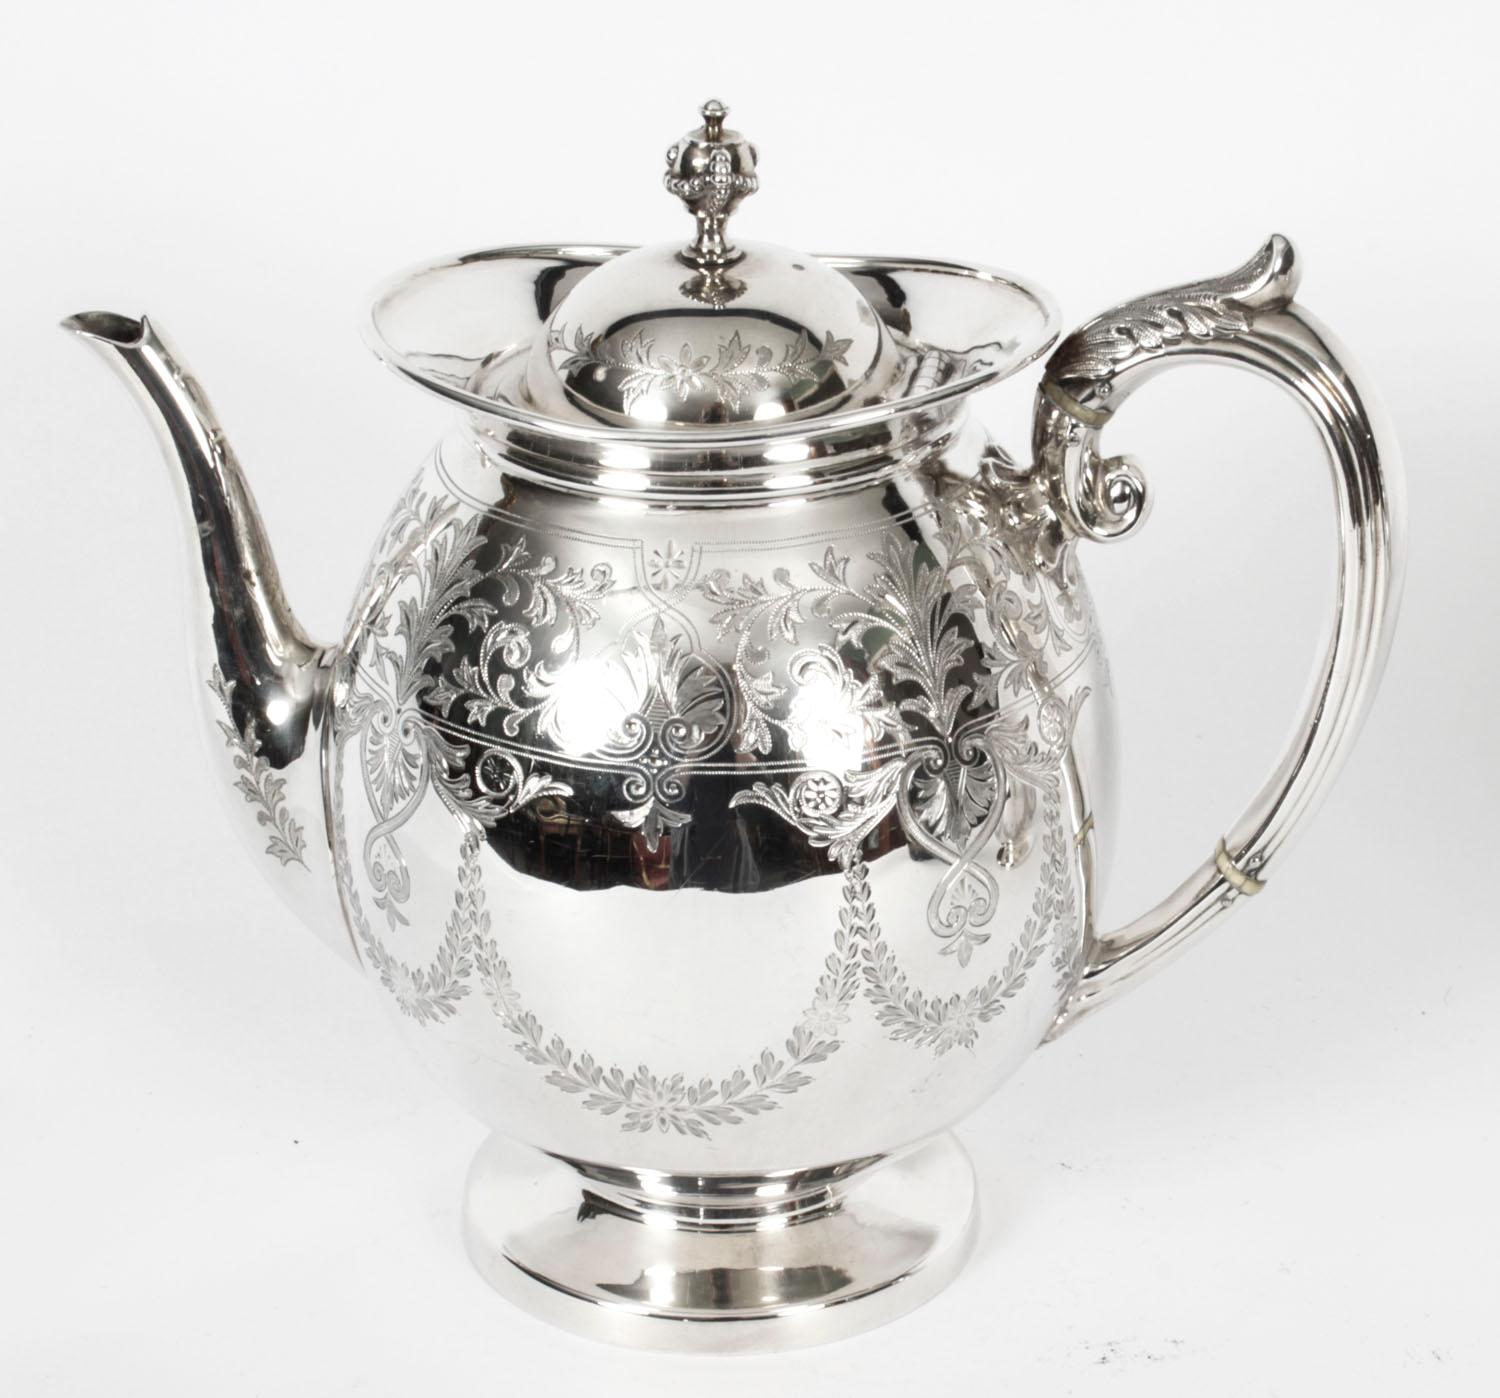 This is a wonderful English antique Victorian three piece silver plated tea set, bearing the makers mark HA for the renowned silversmith Atkin Brothers and Circa 1890 in ate.

It has superb engraved decoration, is raised on three elegant legs and